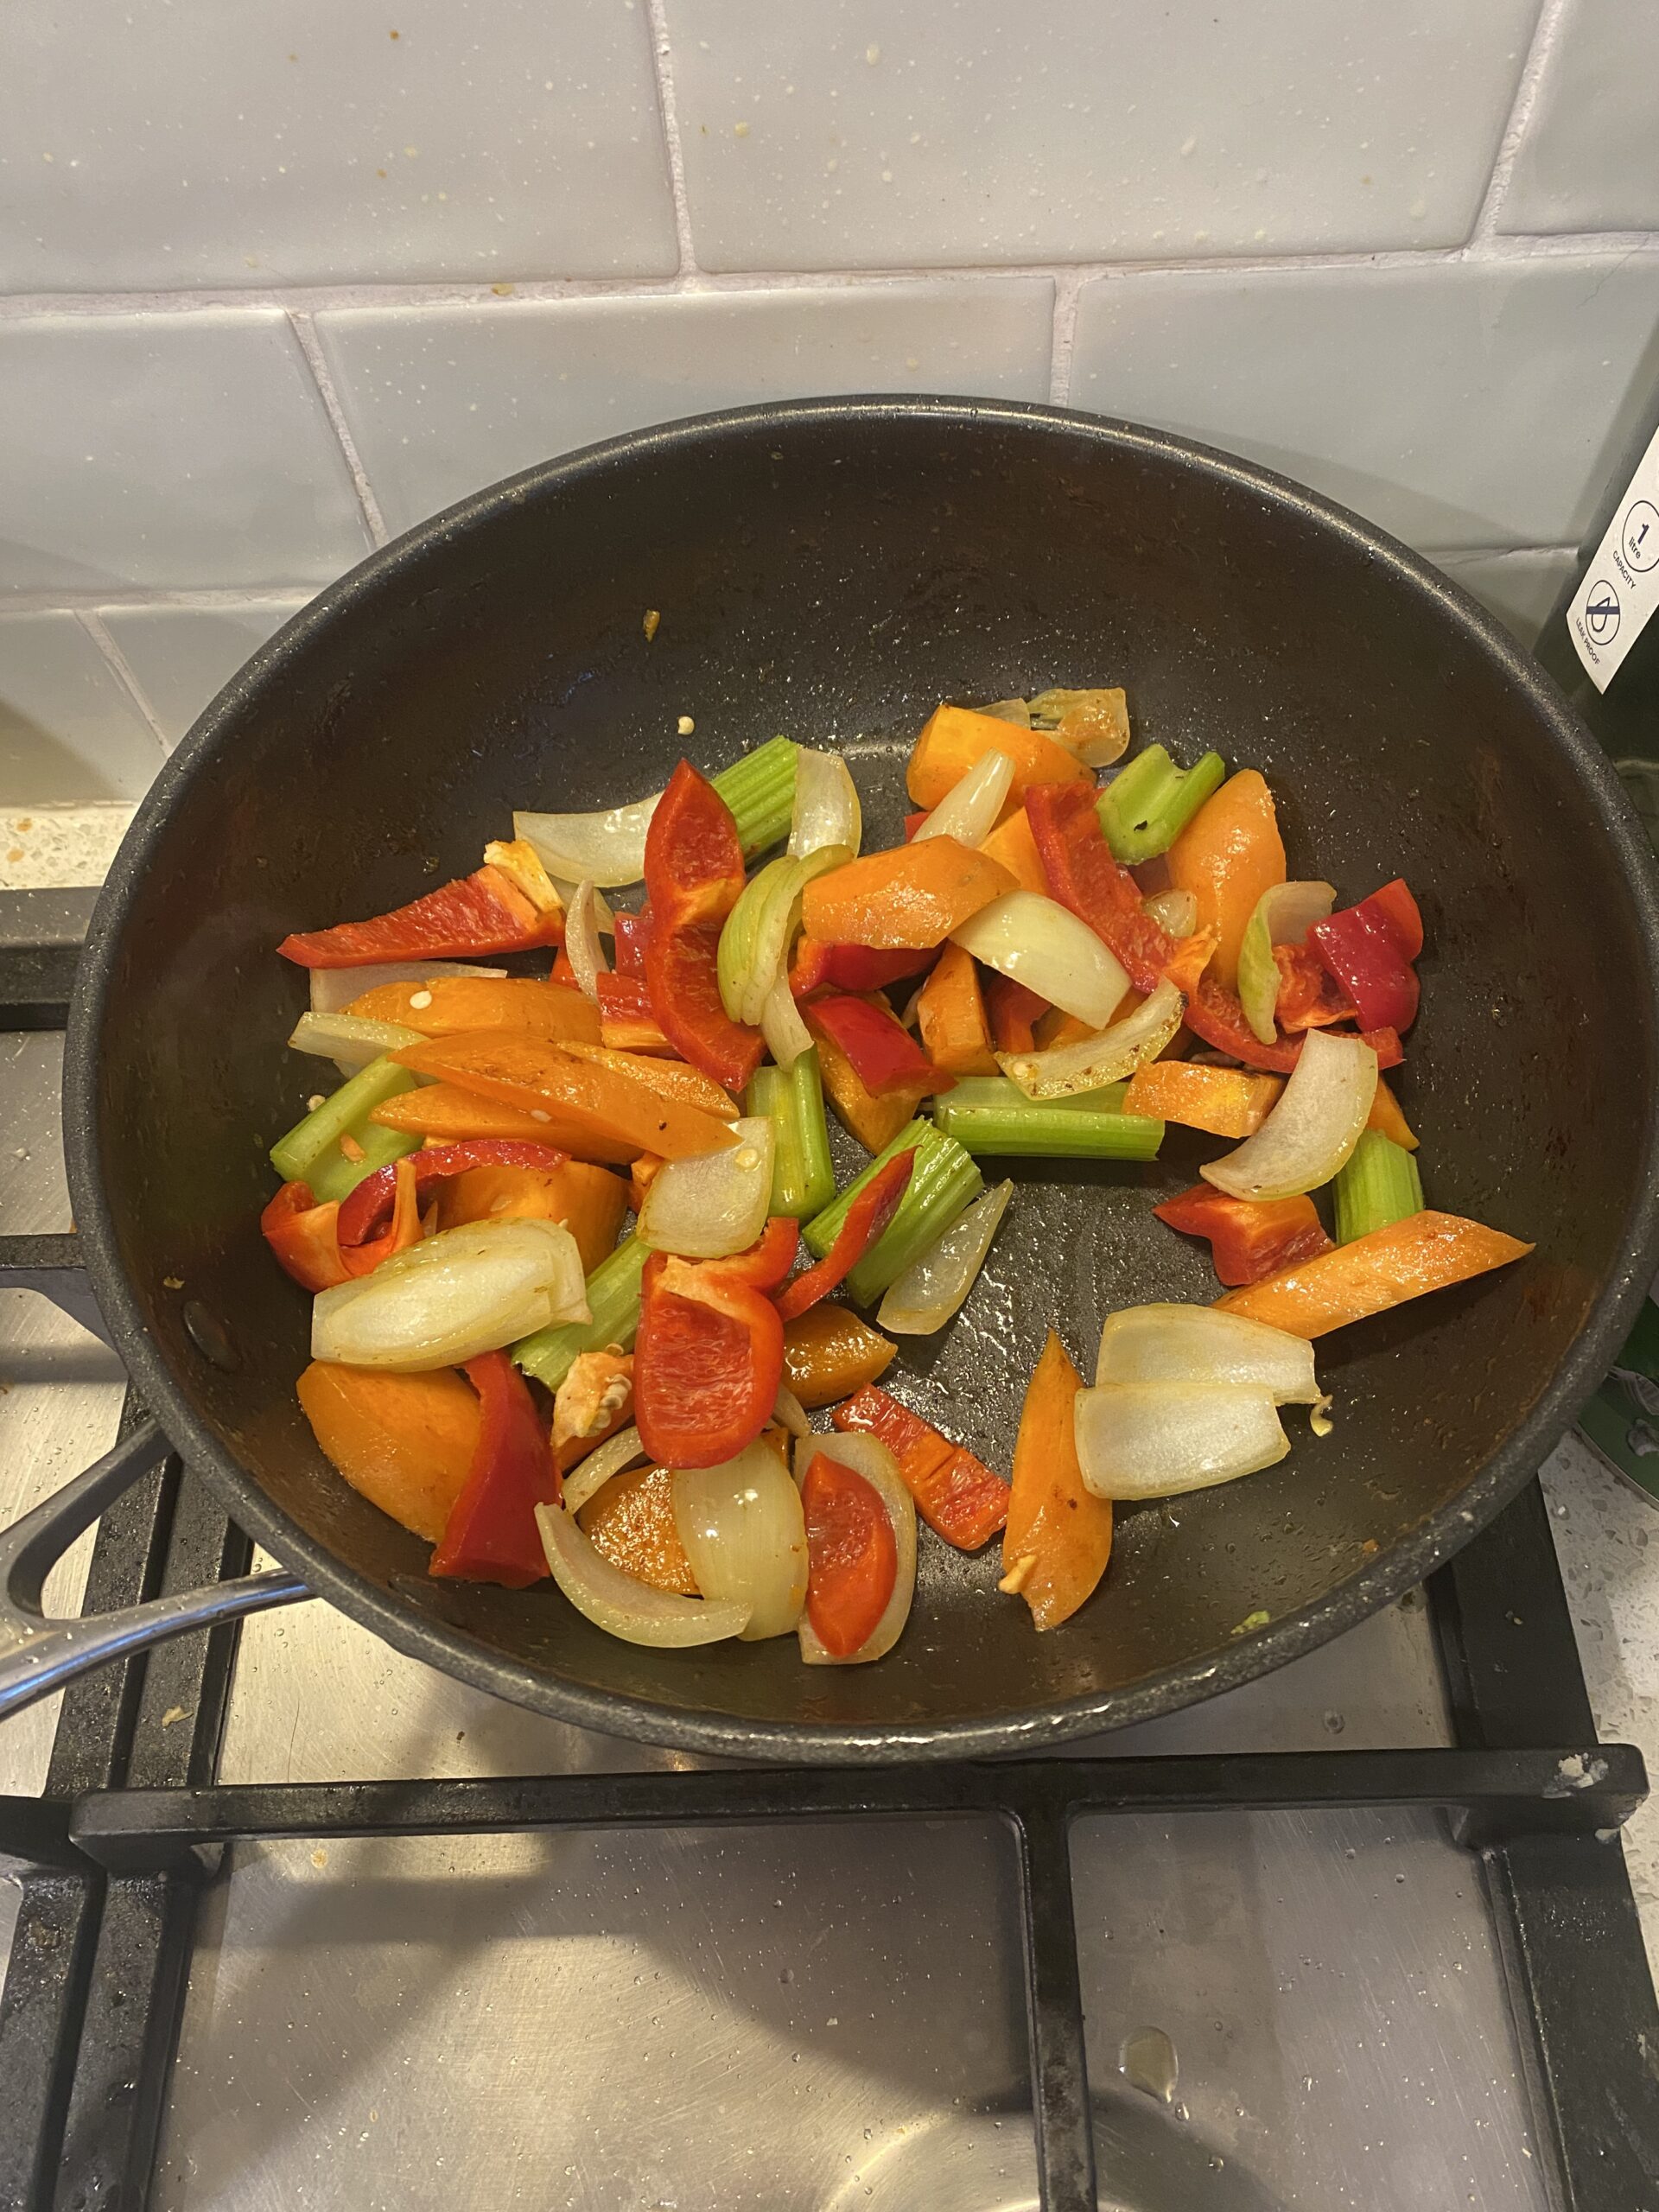 colourful vegetables in a stir fry on a cooktop - onion, carrot, capsicum, celery and others